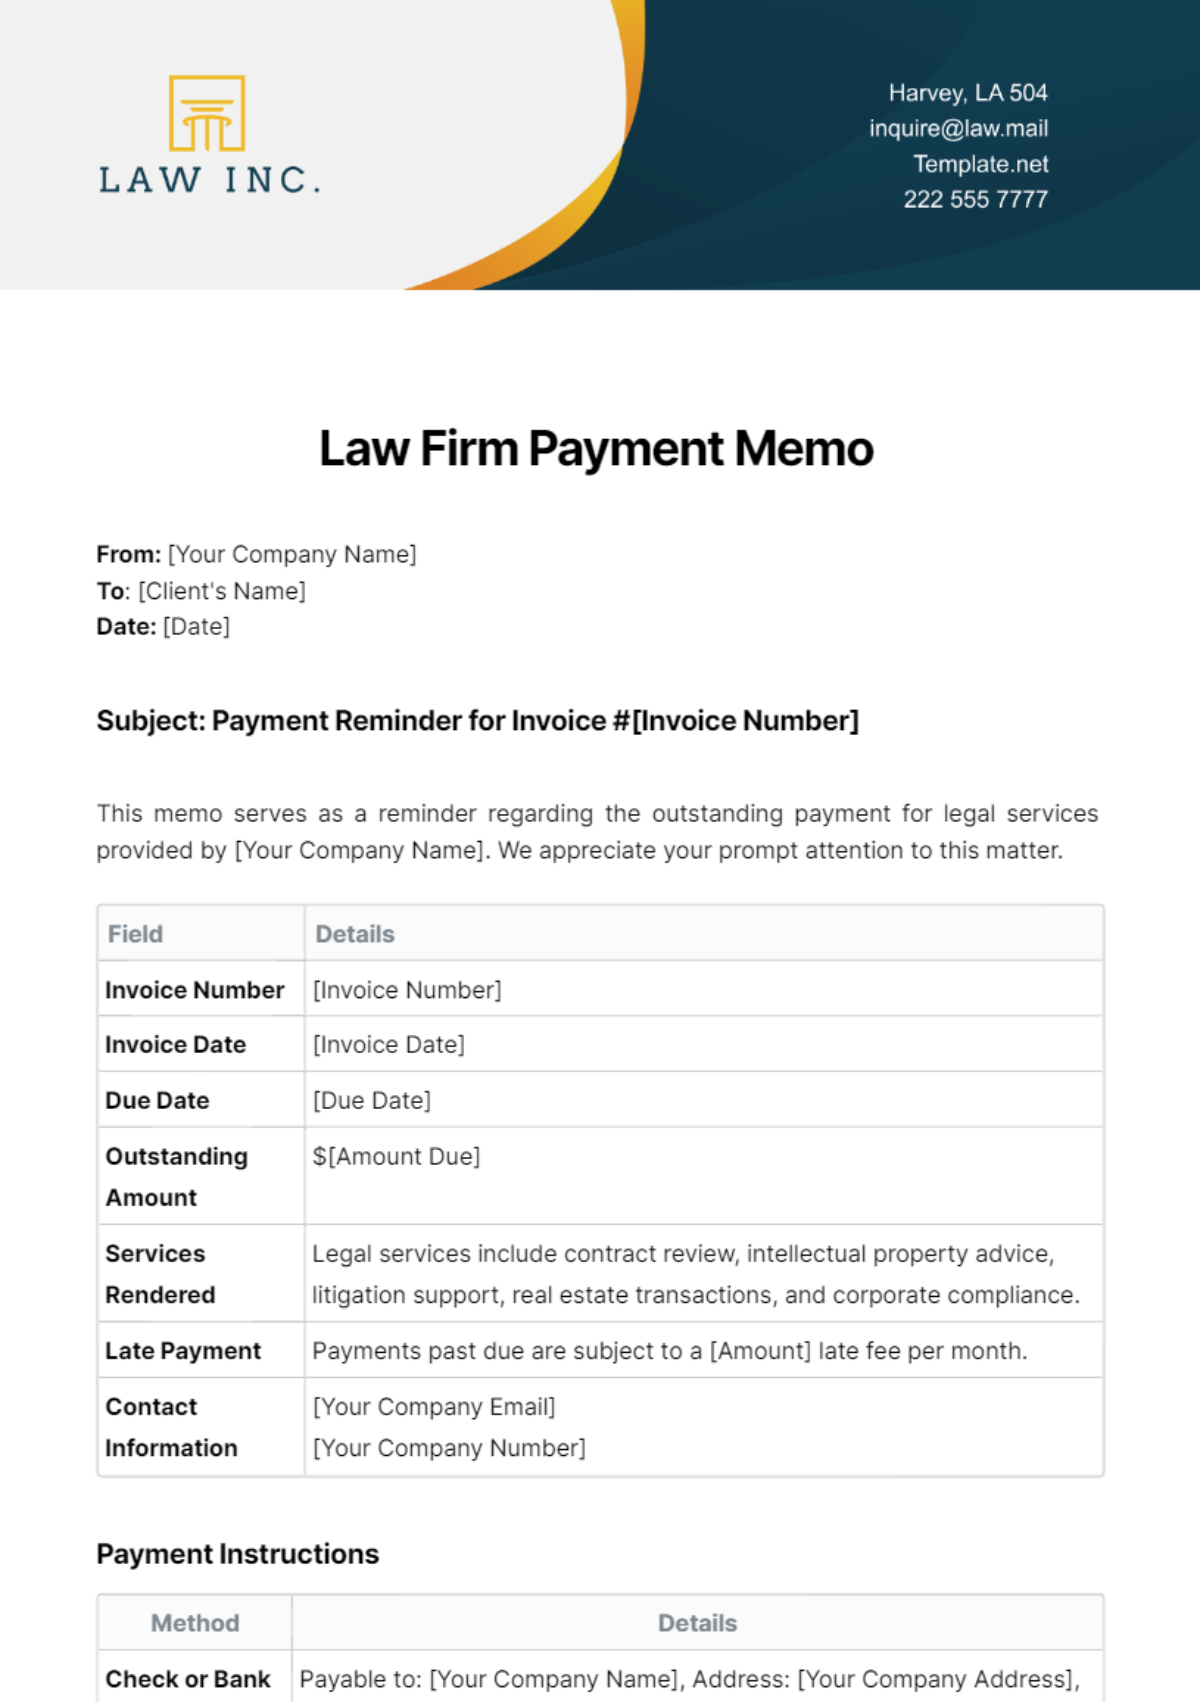 Free Law Firm Payment Memo Template